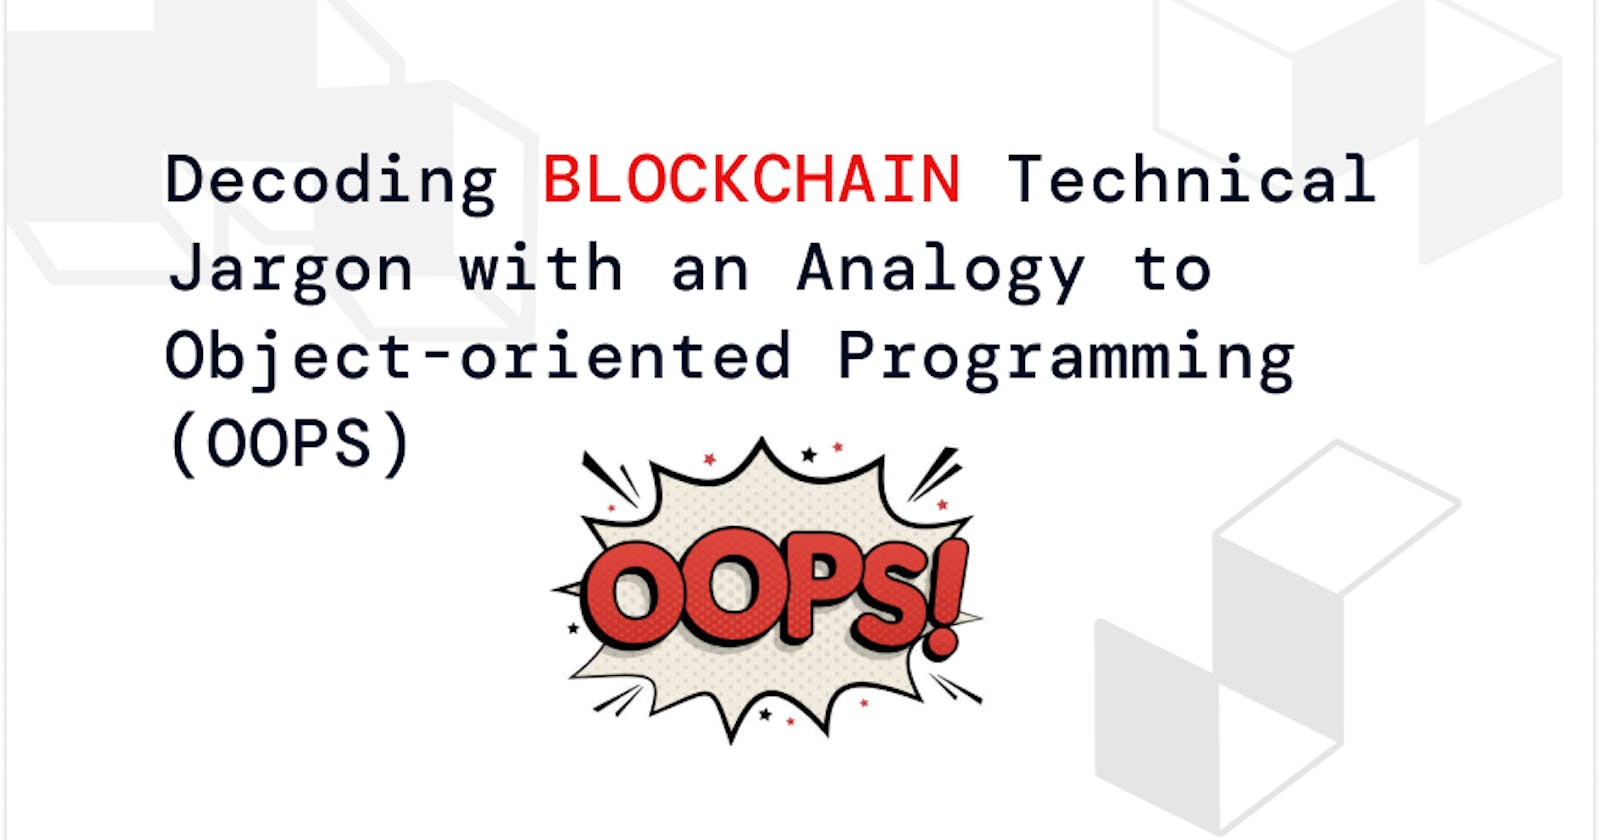 Unraveling Blockchain: Decoding Technical Jargon with an Analogy to Object-oriented Programming